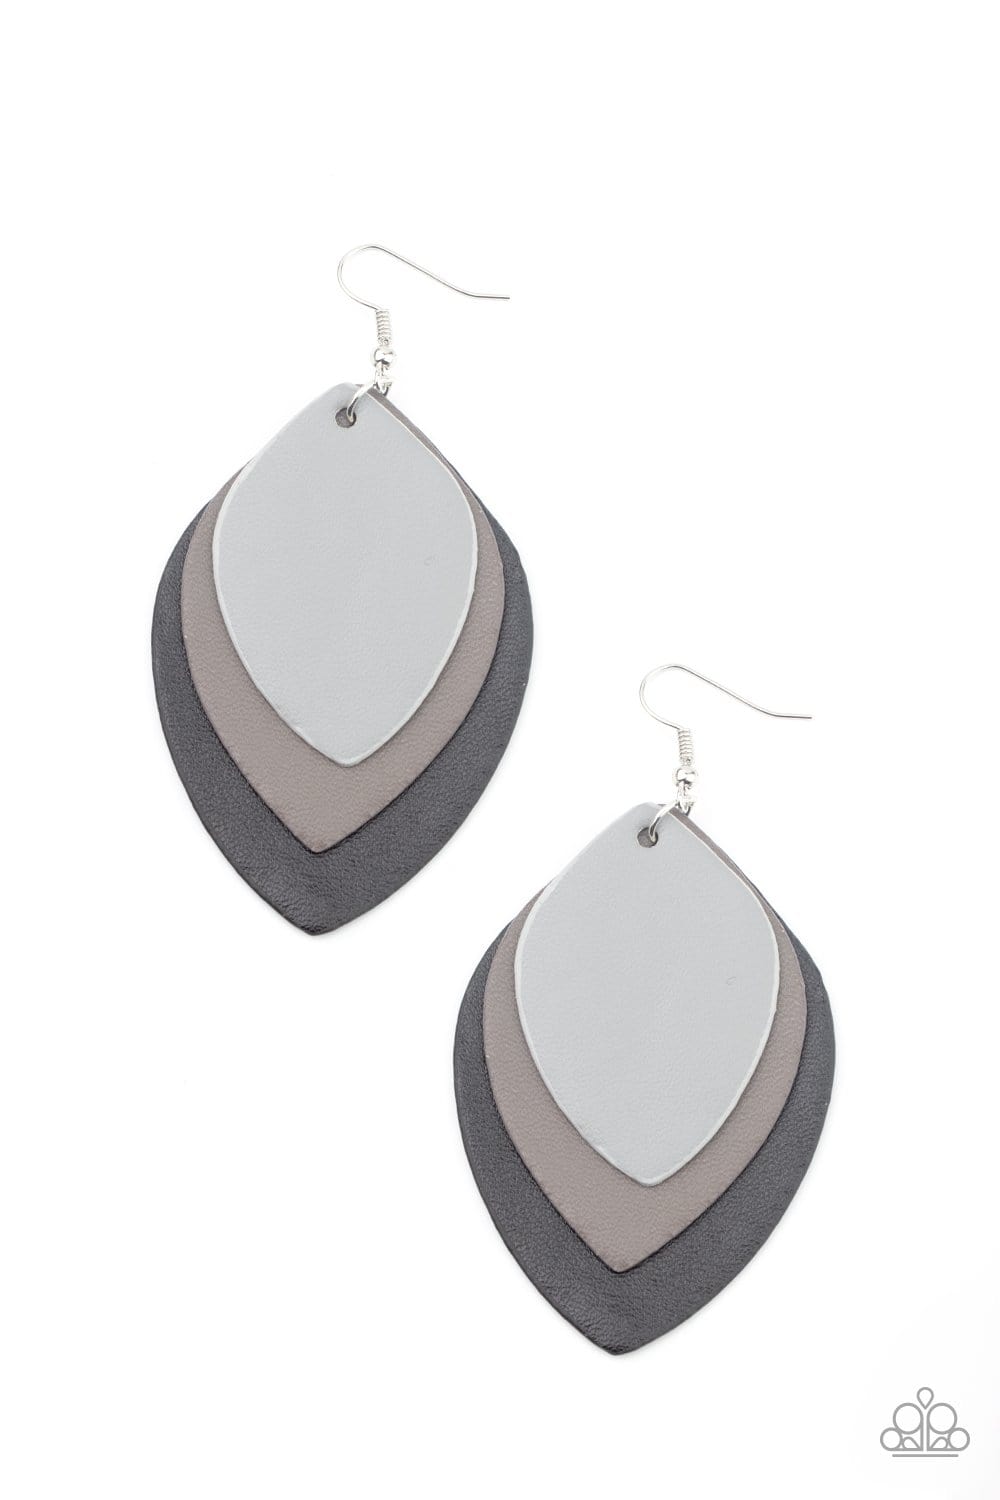 Paparazzi Light as a LEATHER Earrings